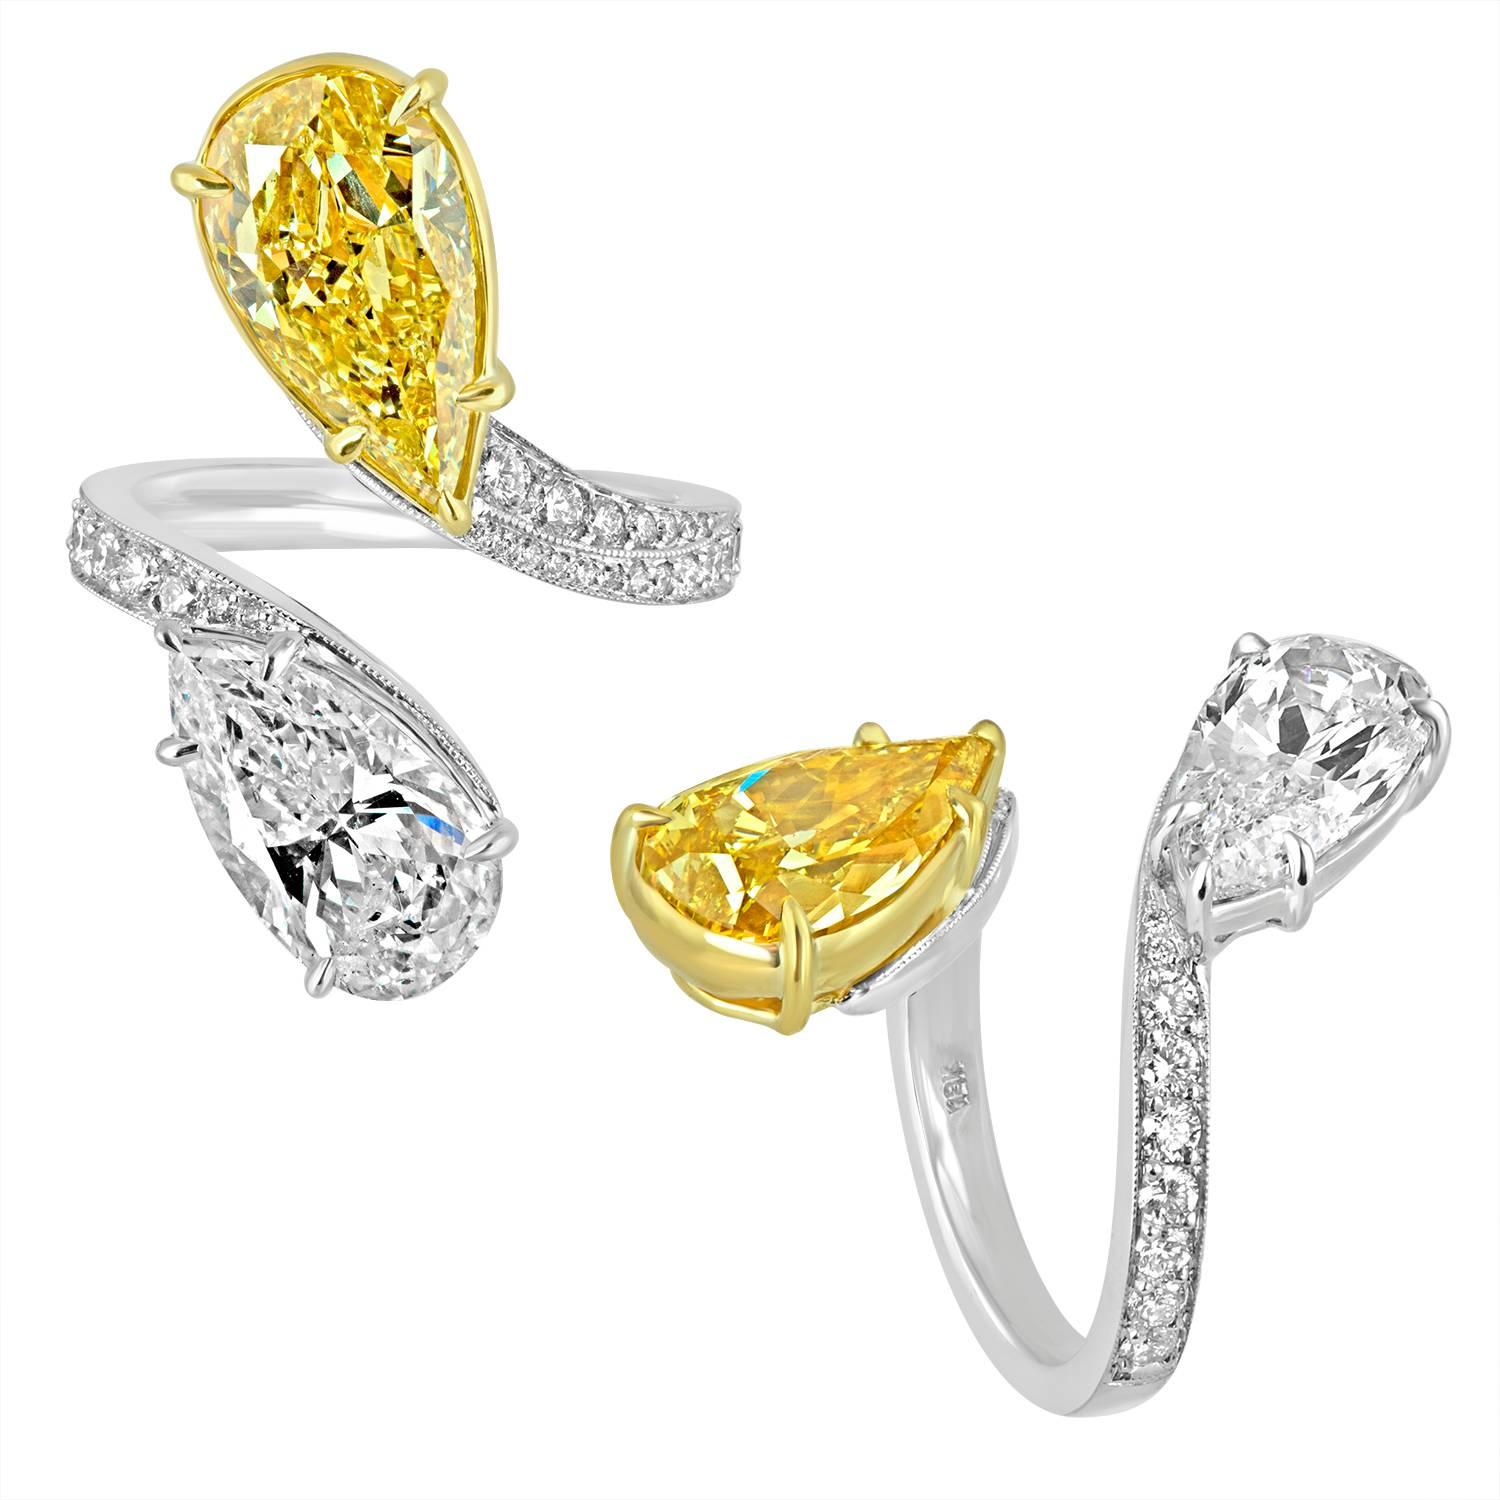 Contemporary 4.06 Carat GIA Certified and 3.02 Carat Diamonds Two Color Gold Ring